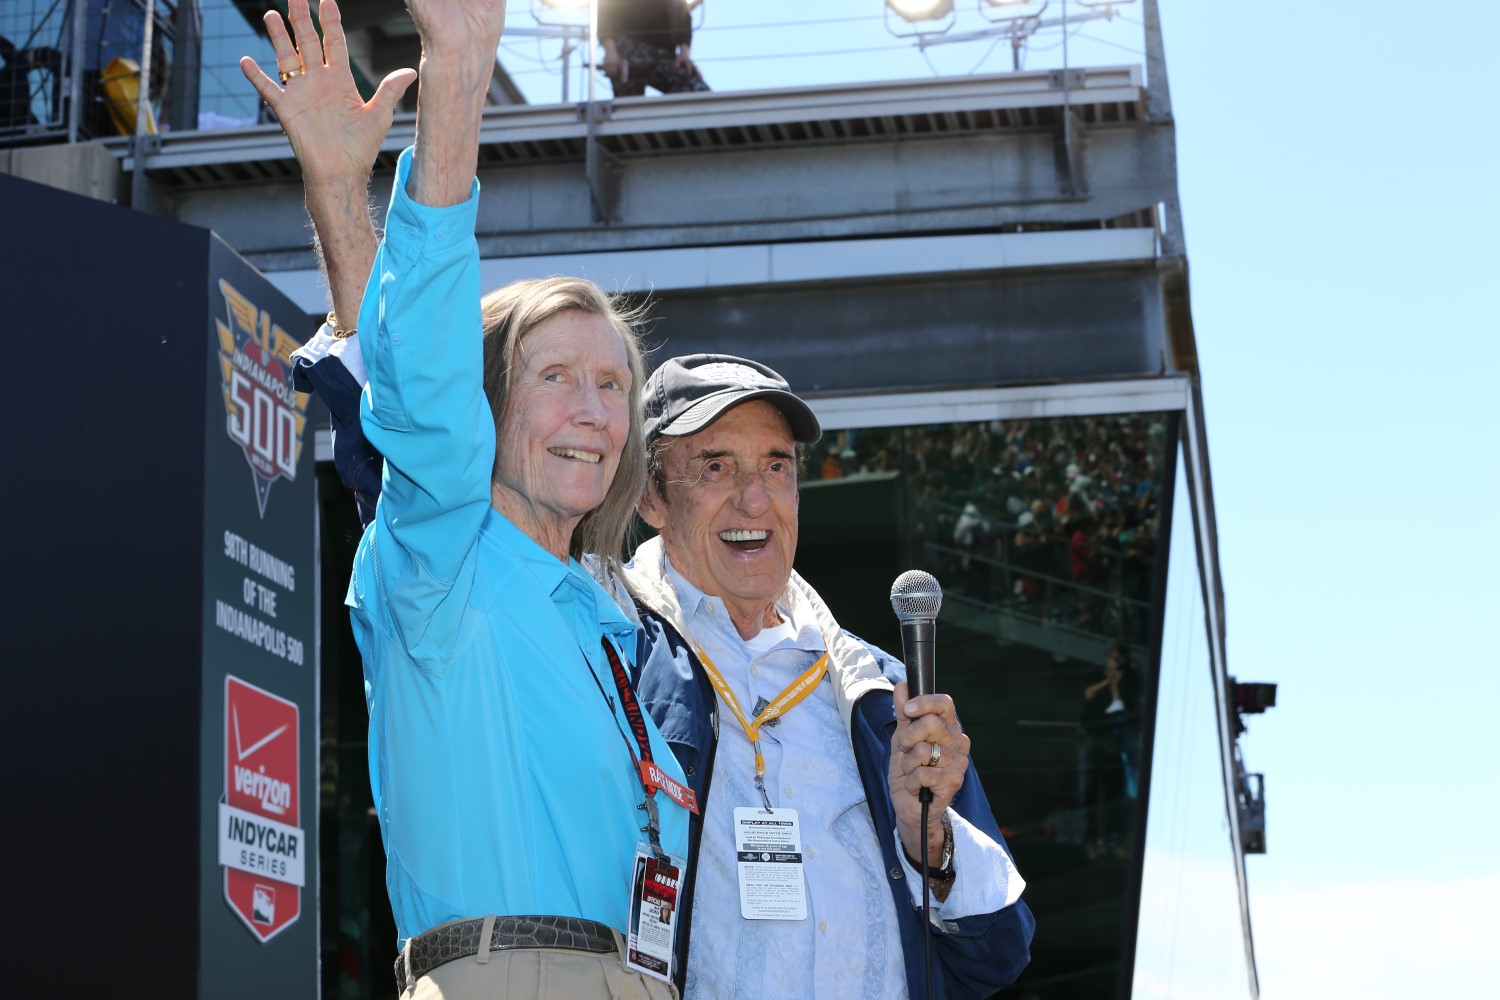 With Jim Nabors at Indy 500